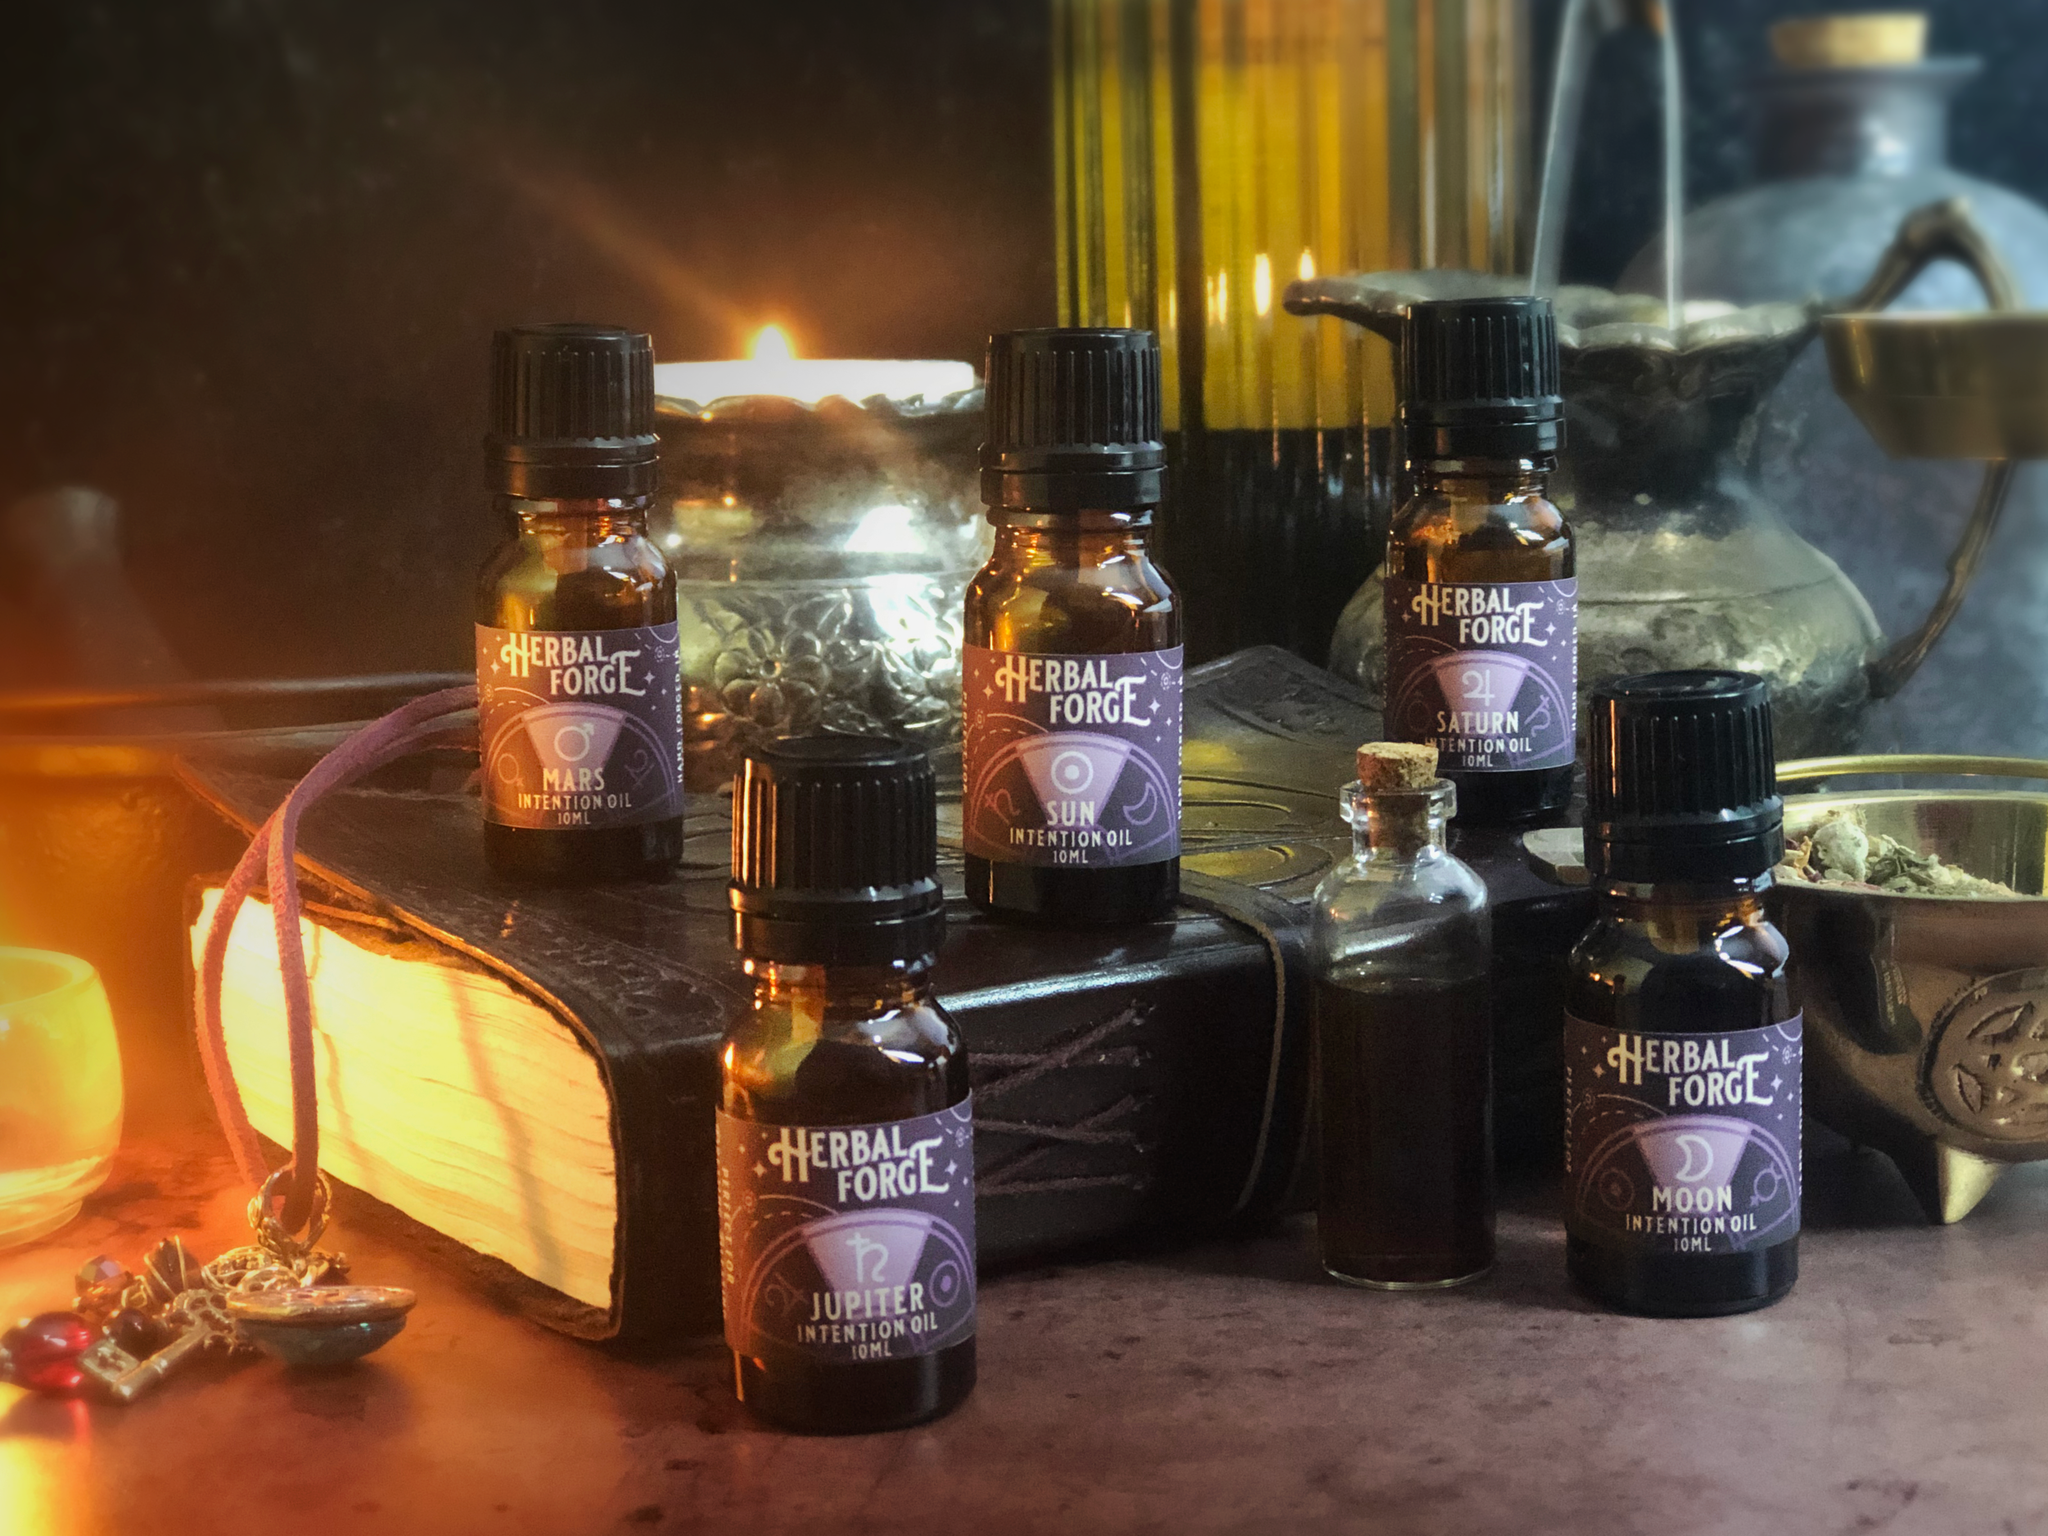 Herbal Forge Planetary Oils